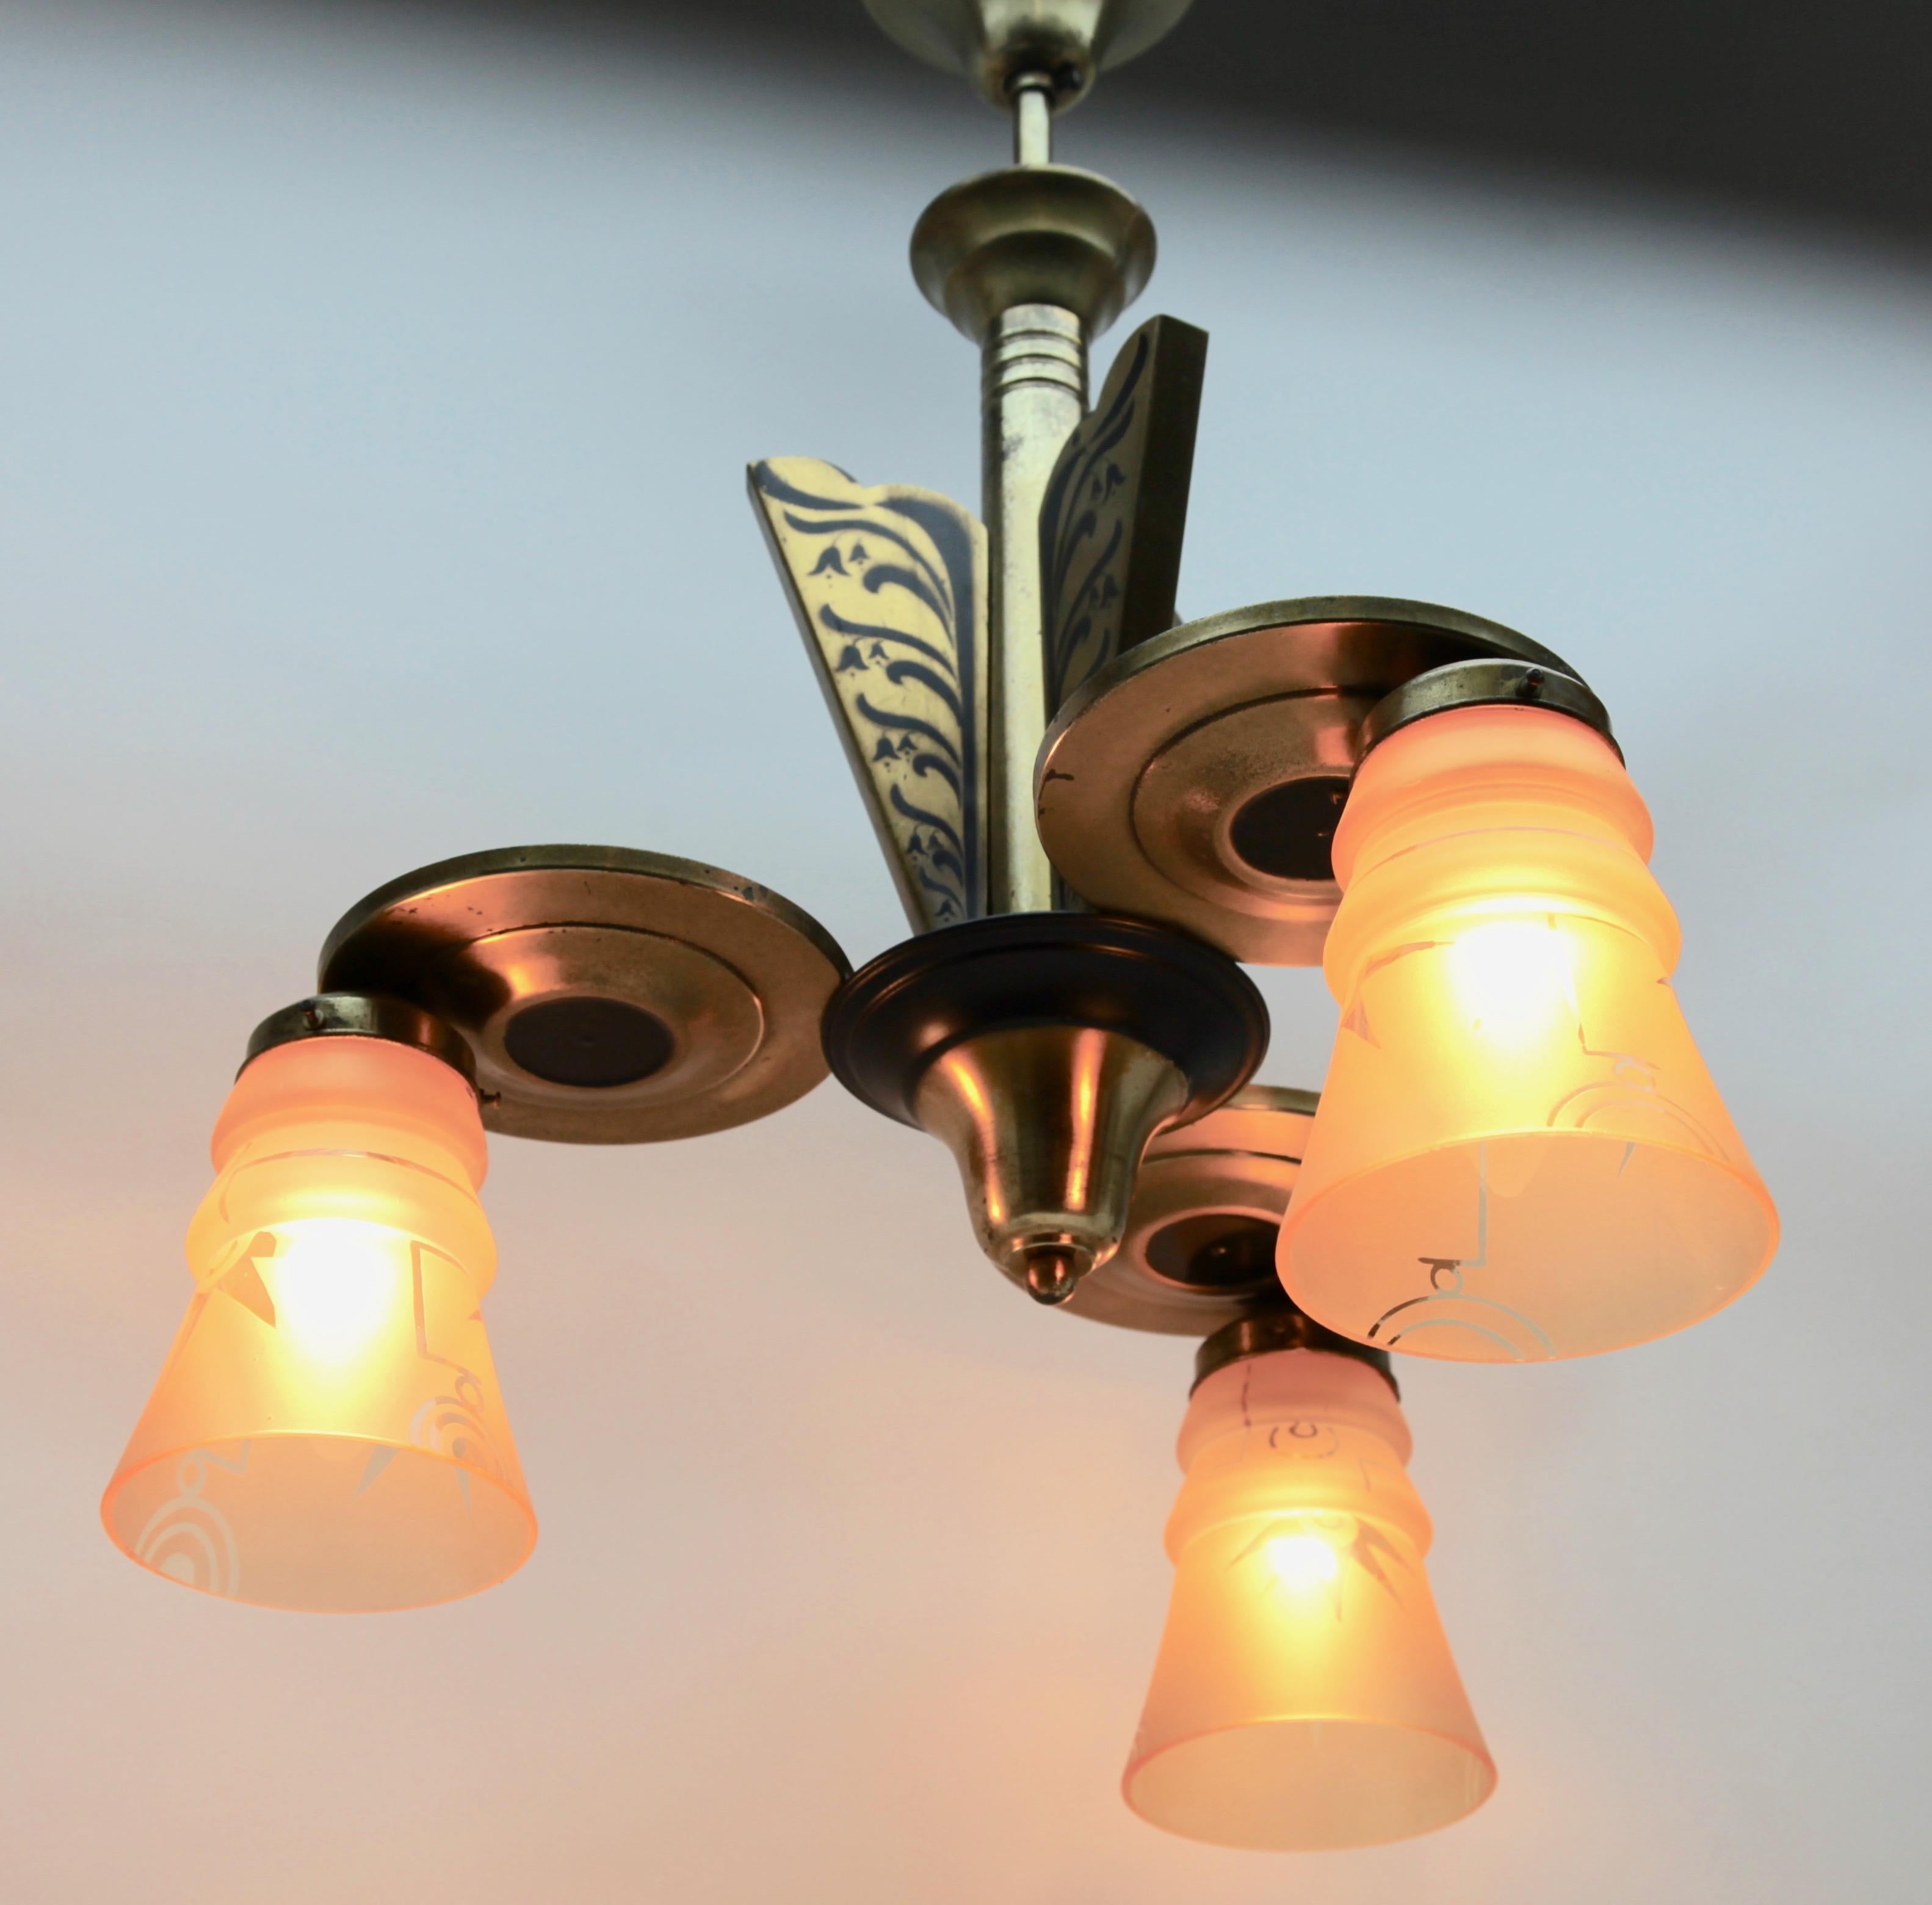 Art Glass Art Deco Brass Chandelier Three Arms Glass Lampshades Whit Pattern For Sale